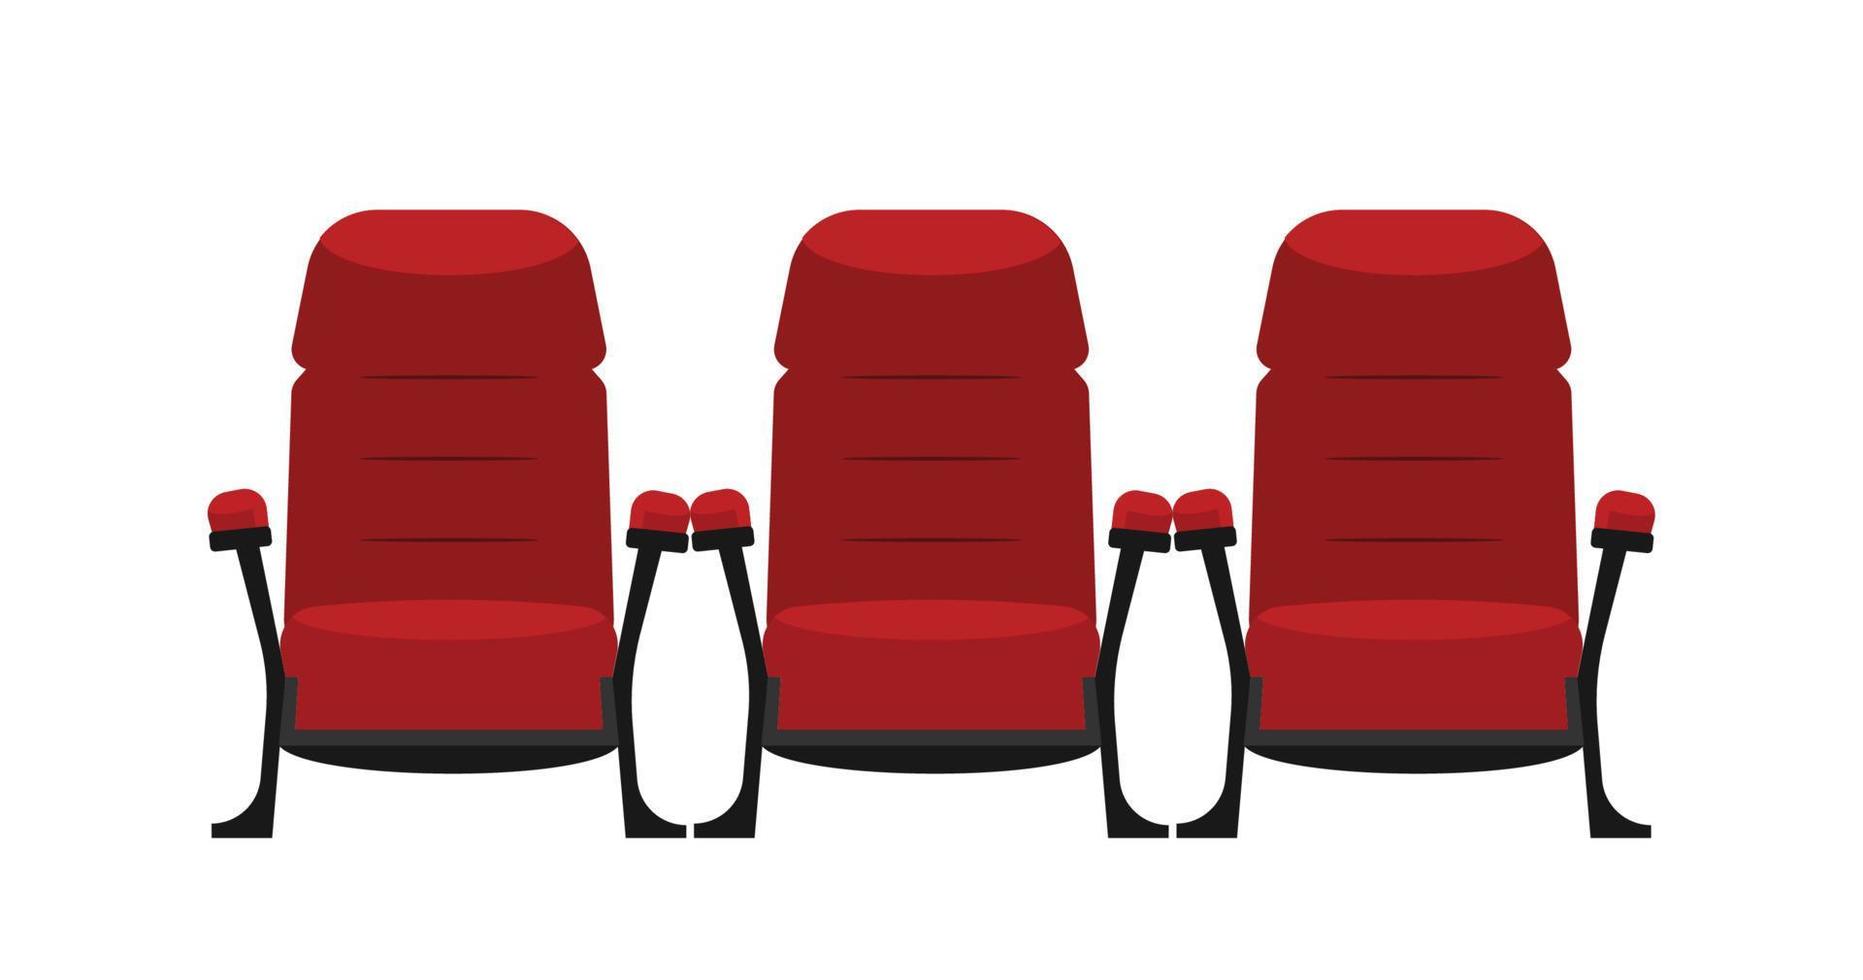 Cinema concept - Front view of red cinema chair vector